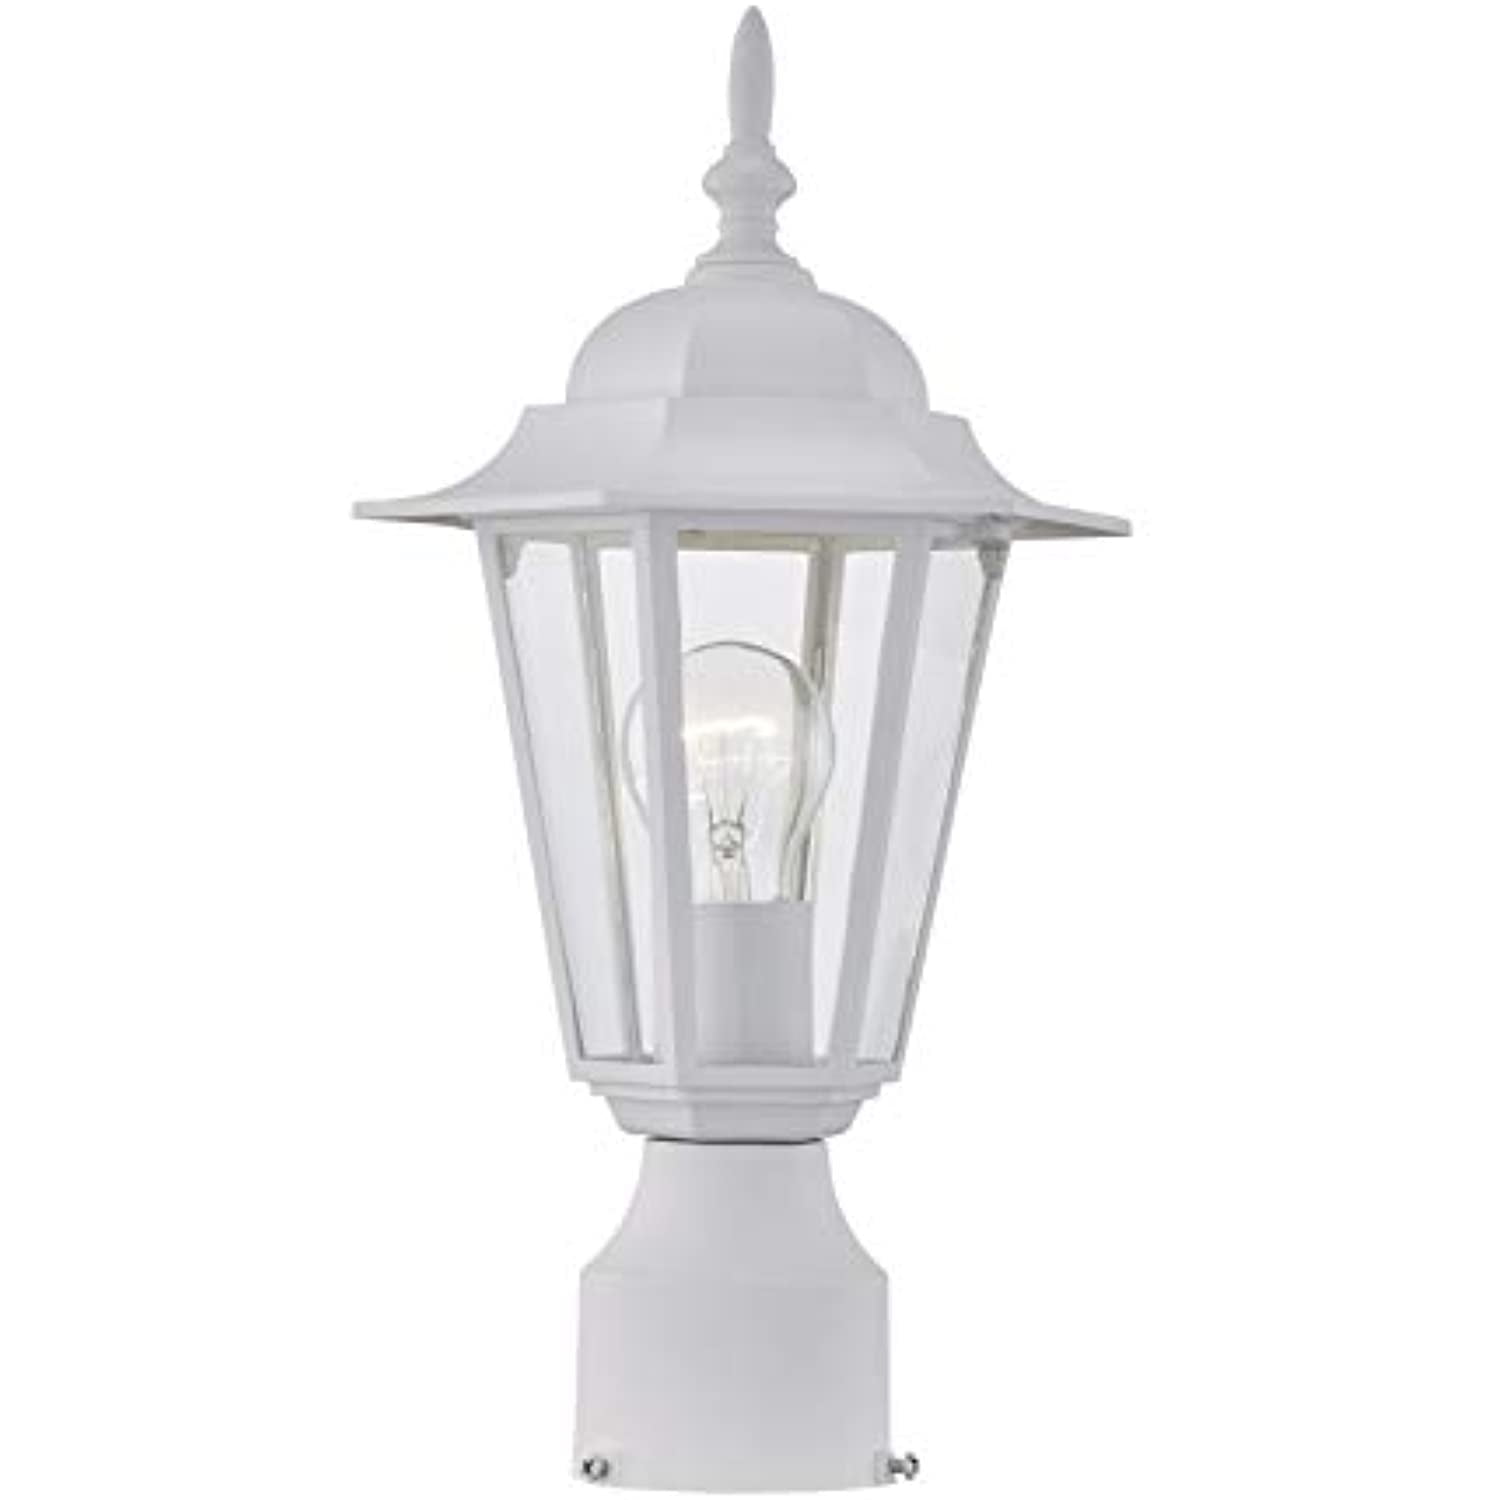 E26 Base 100W Max Bulbs not Included WISBEAM Outdoor Post Light Pole Lantern Black Finish Wet Location Rated ETL Qualified Aluminum Housing Plus Glass 